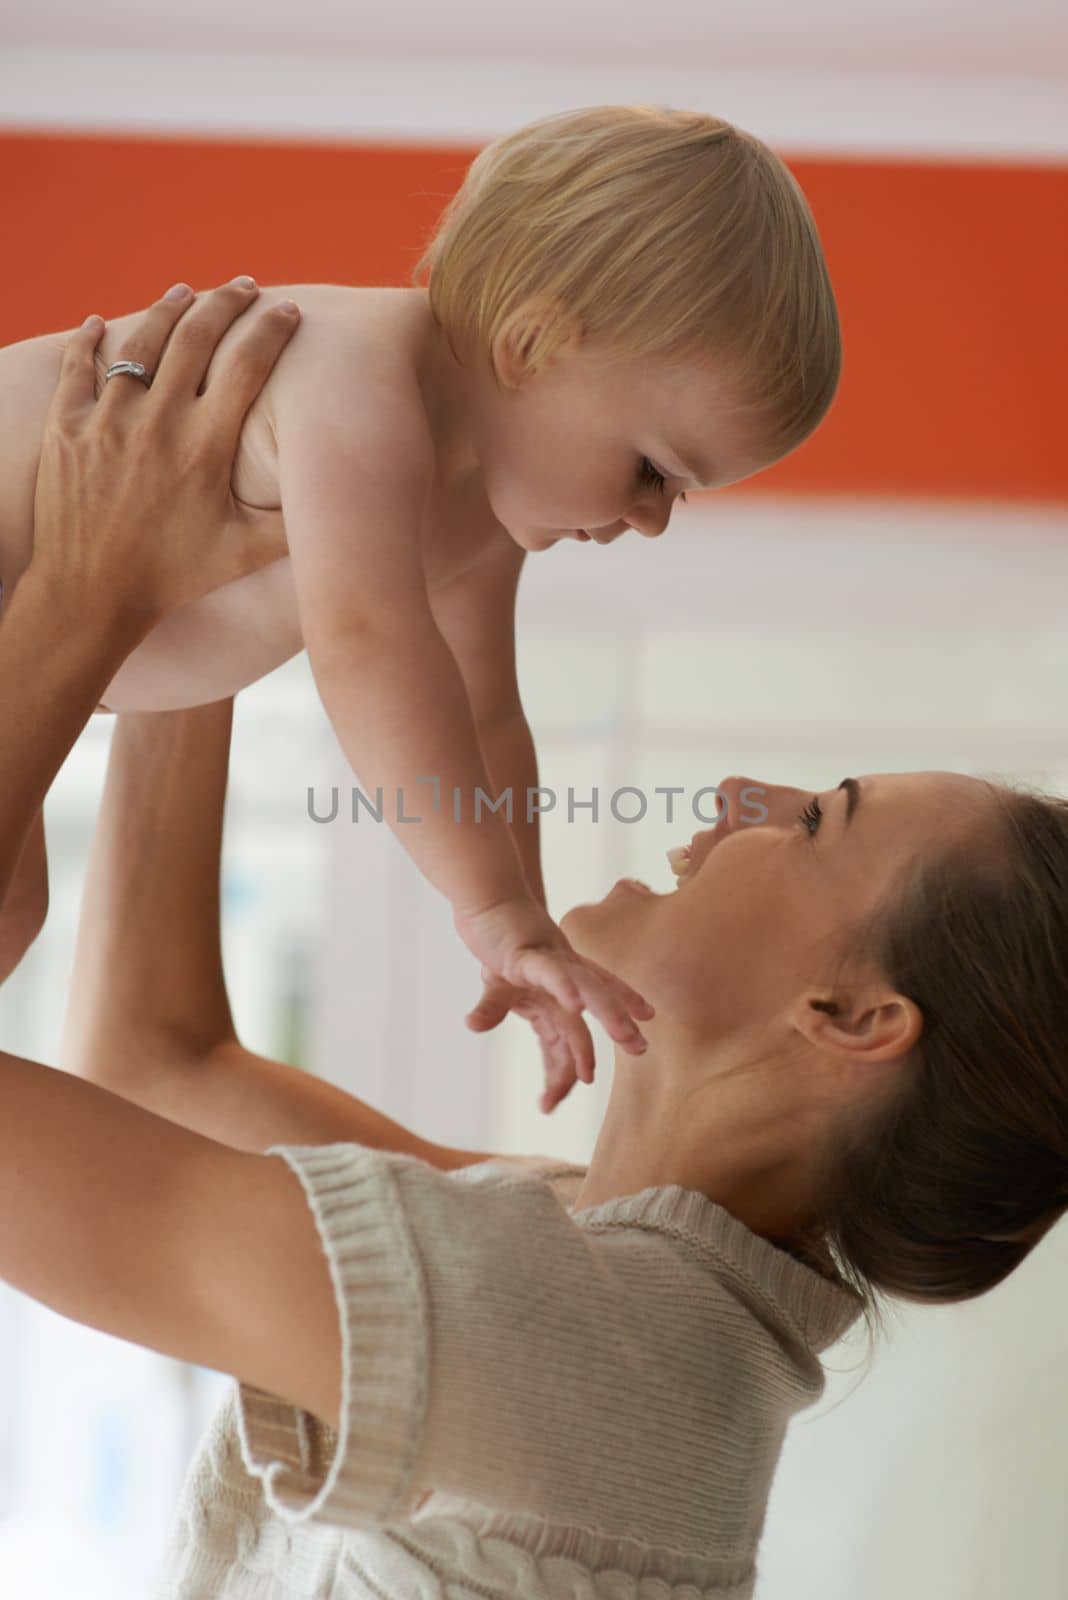 Her love for him is unending. A mother lifting her baby boy up in the air